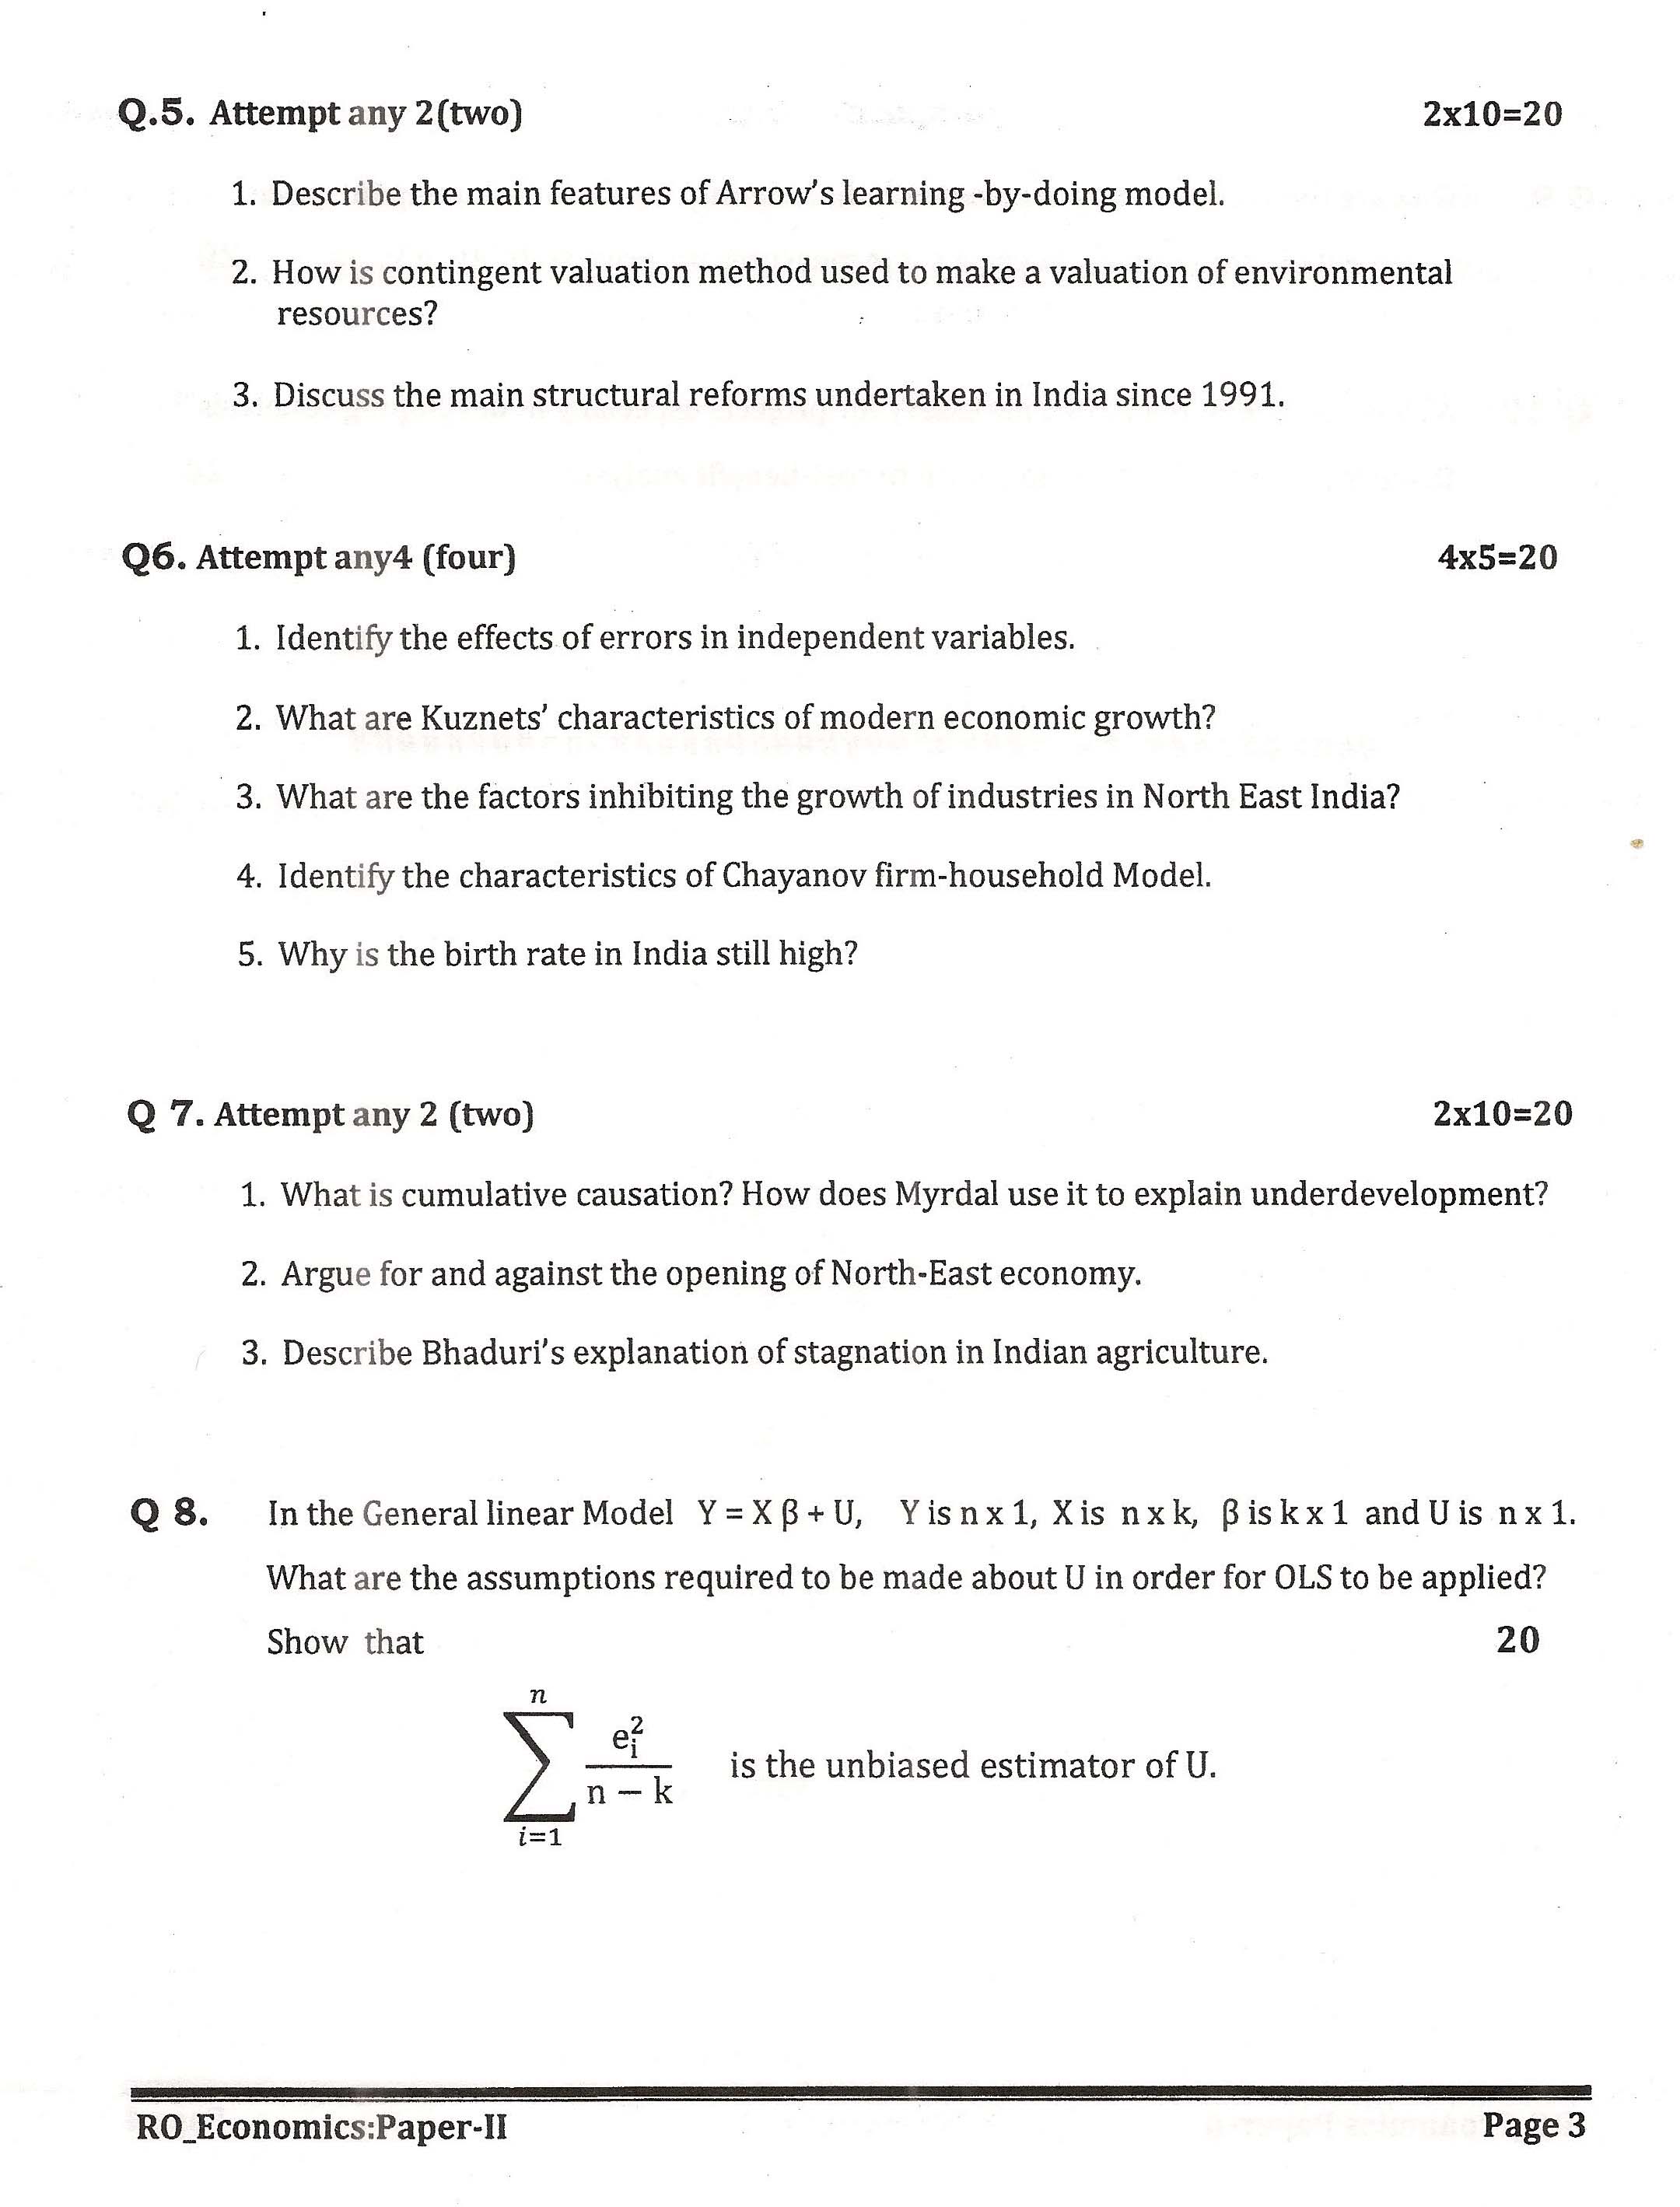 APPSC Research Officer Economics Paper II Exam Question Paper 2014 3